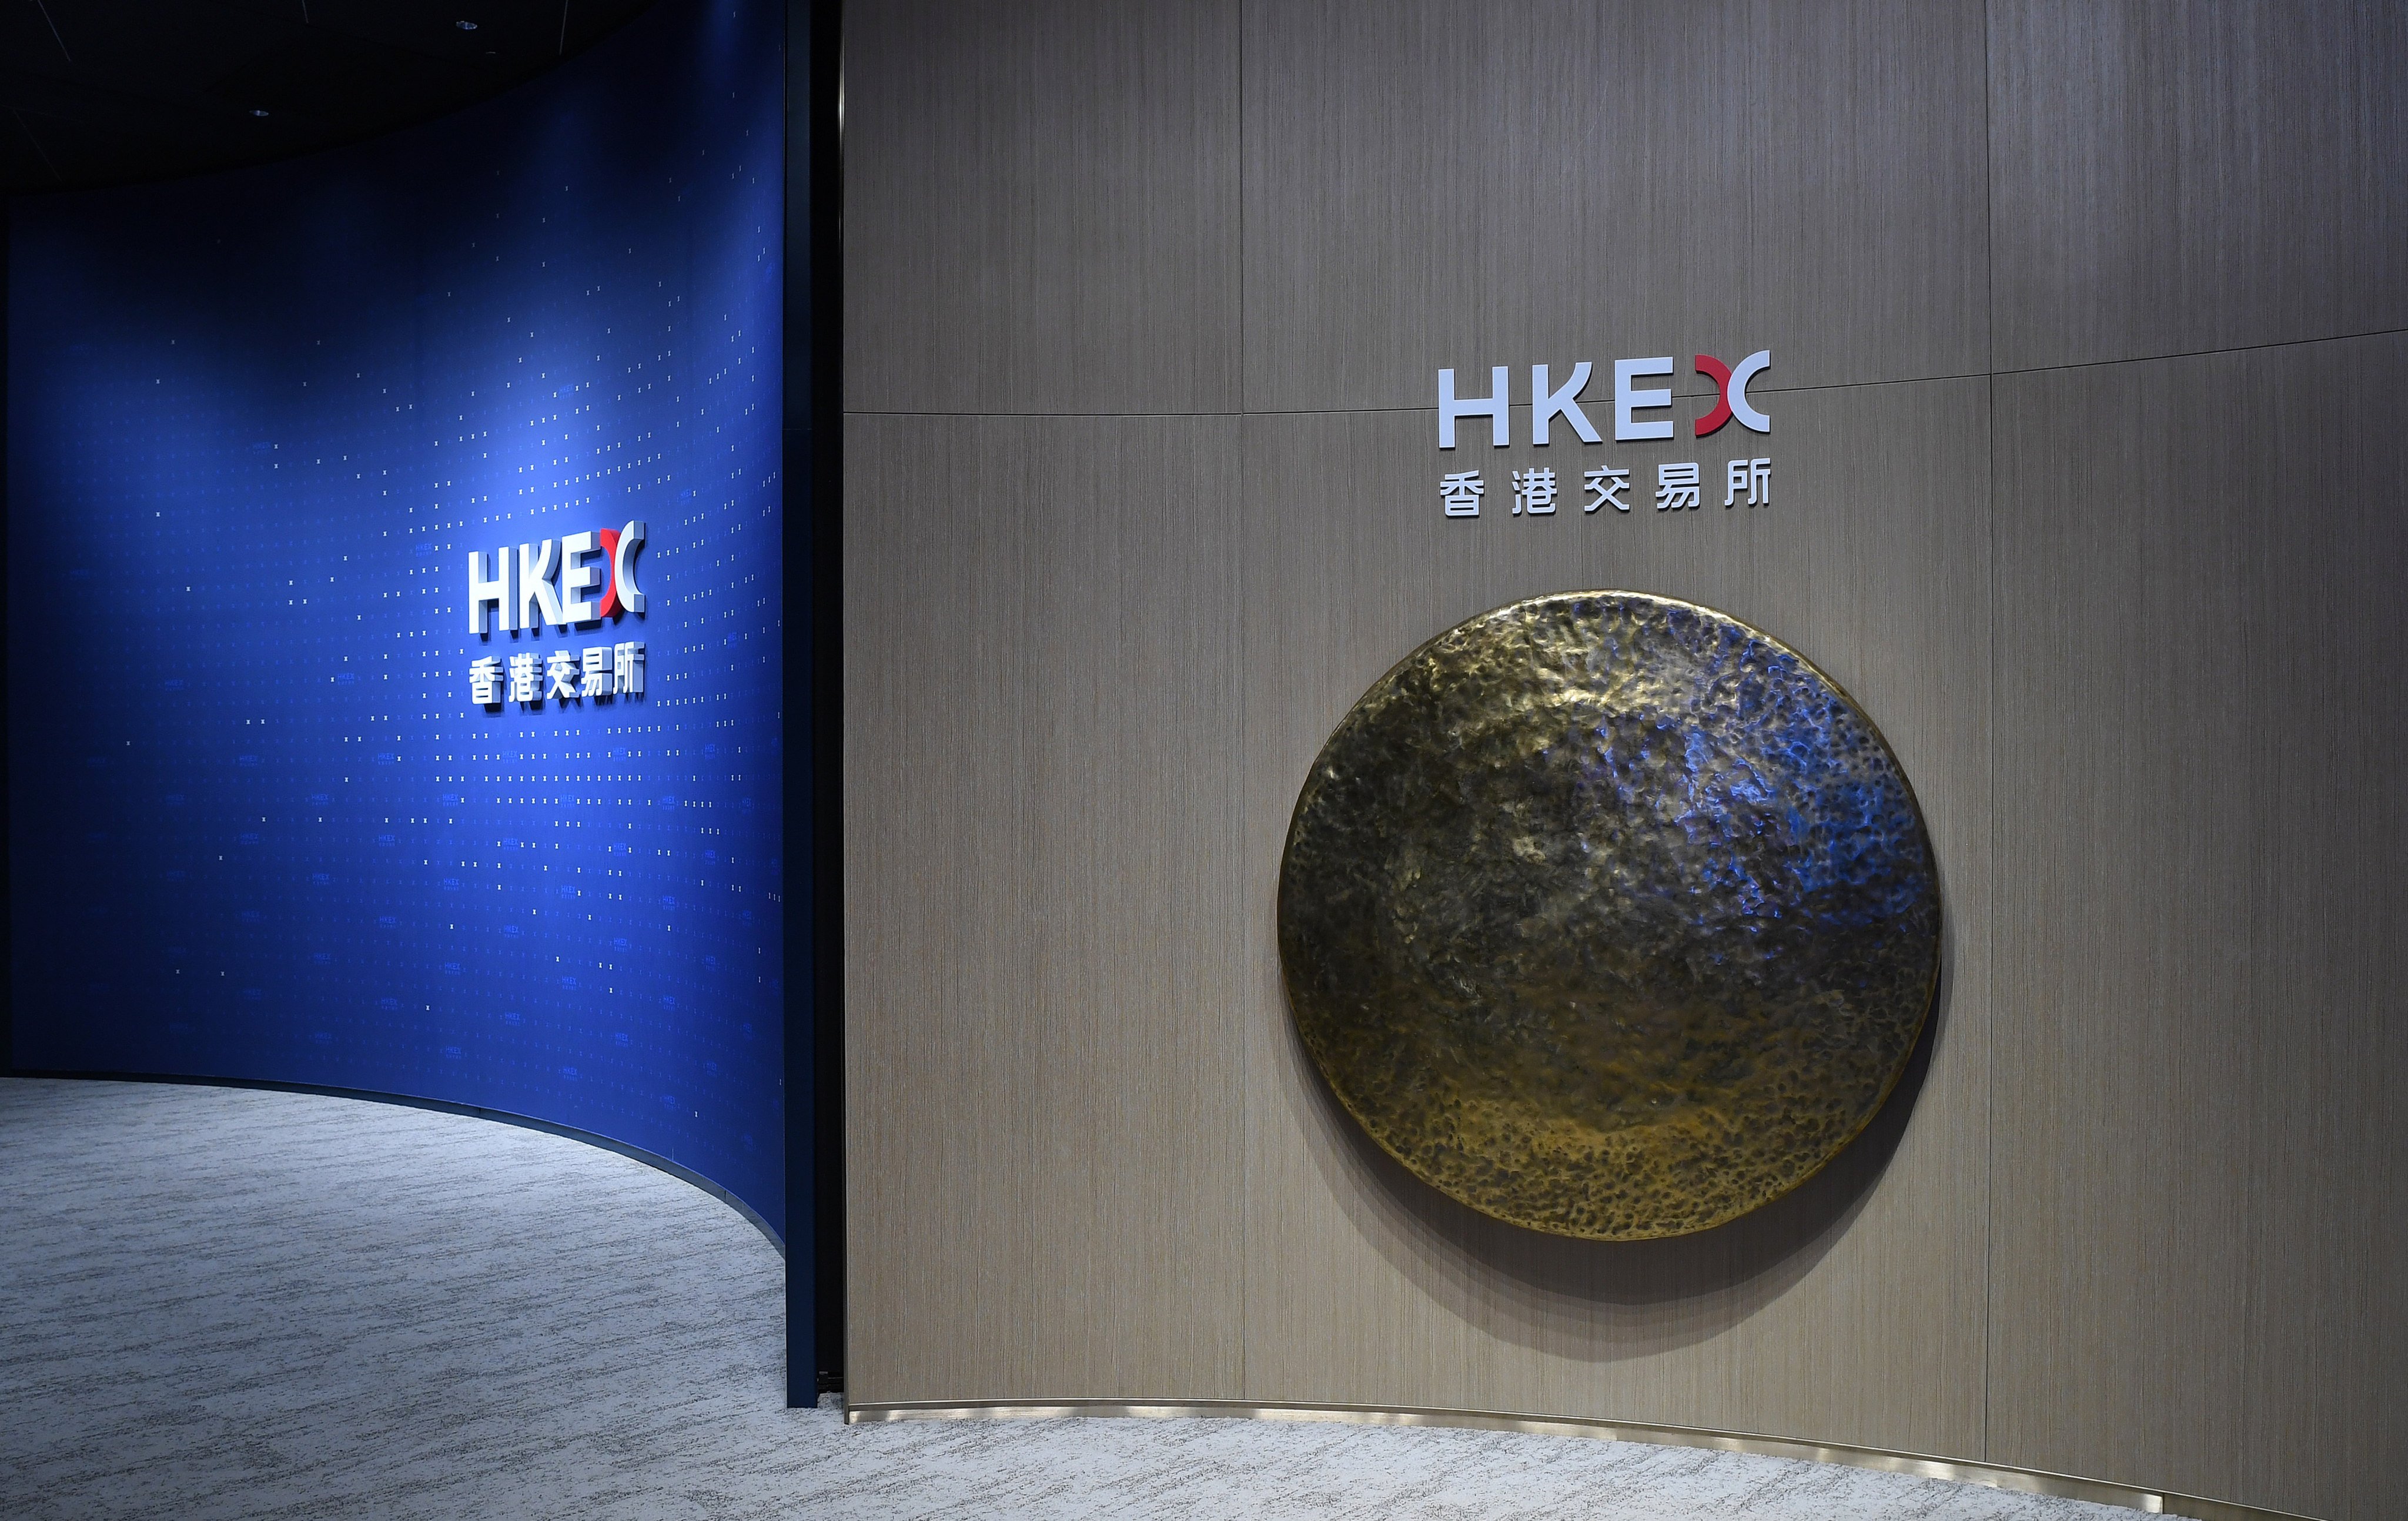 A gong used to mark new share listings is displayed inside the offices of Hong Kong Exchanges and Clearing, the city’s bourse operator. Photo: Xinhua